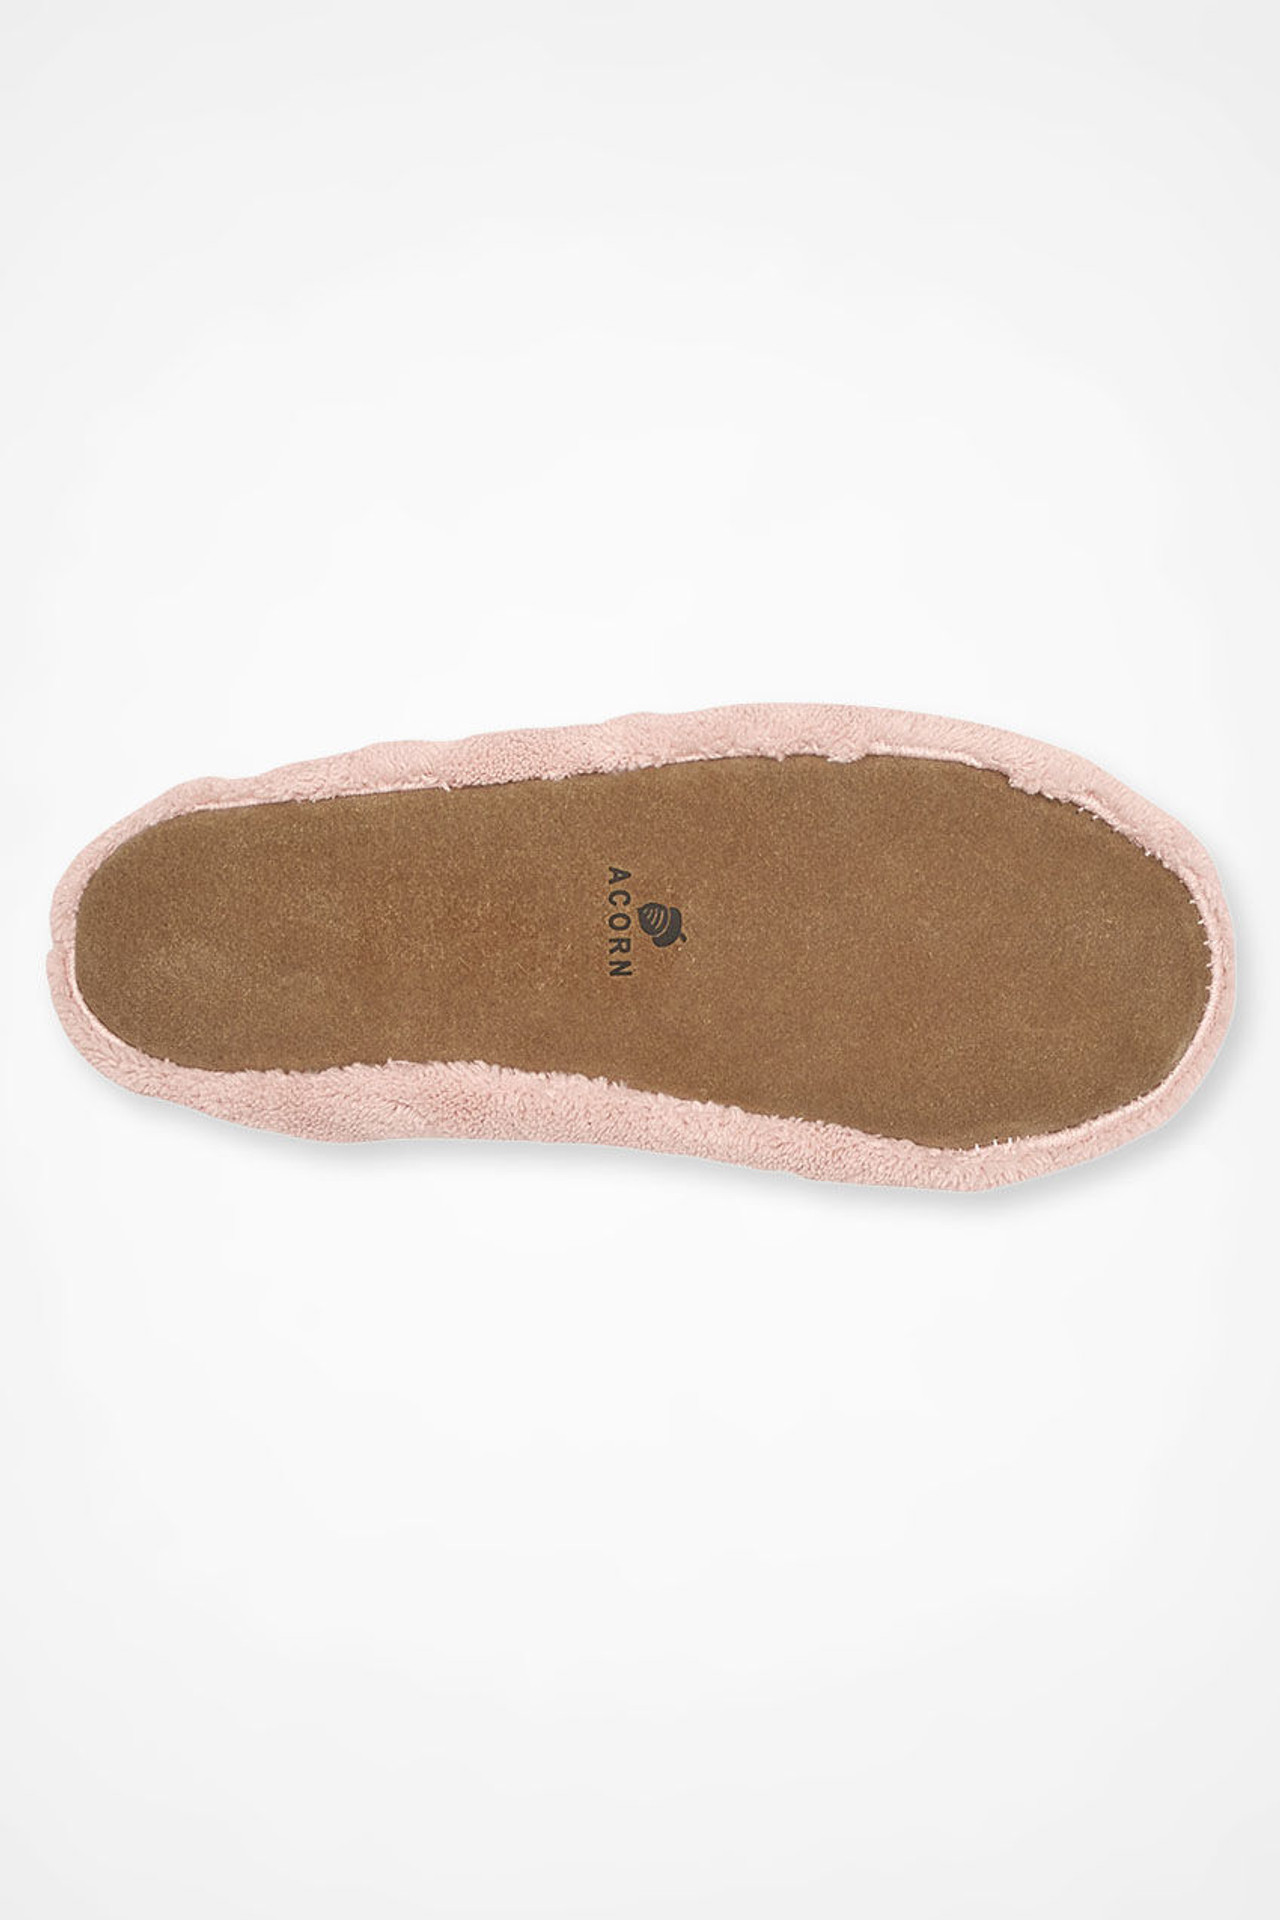 “Spa” Travel Slippers by Acorn®